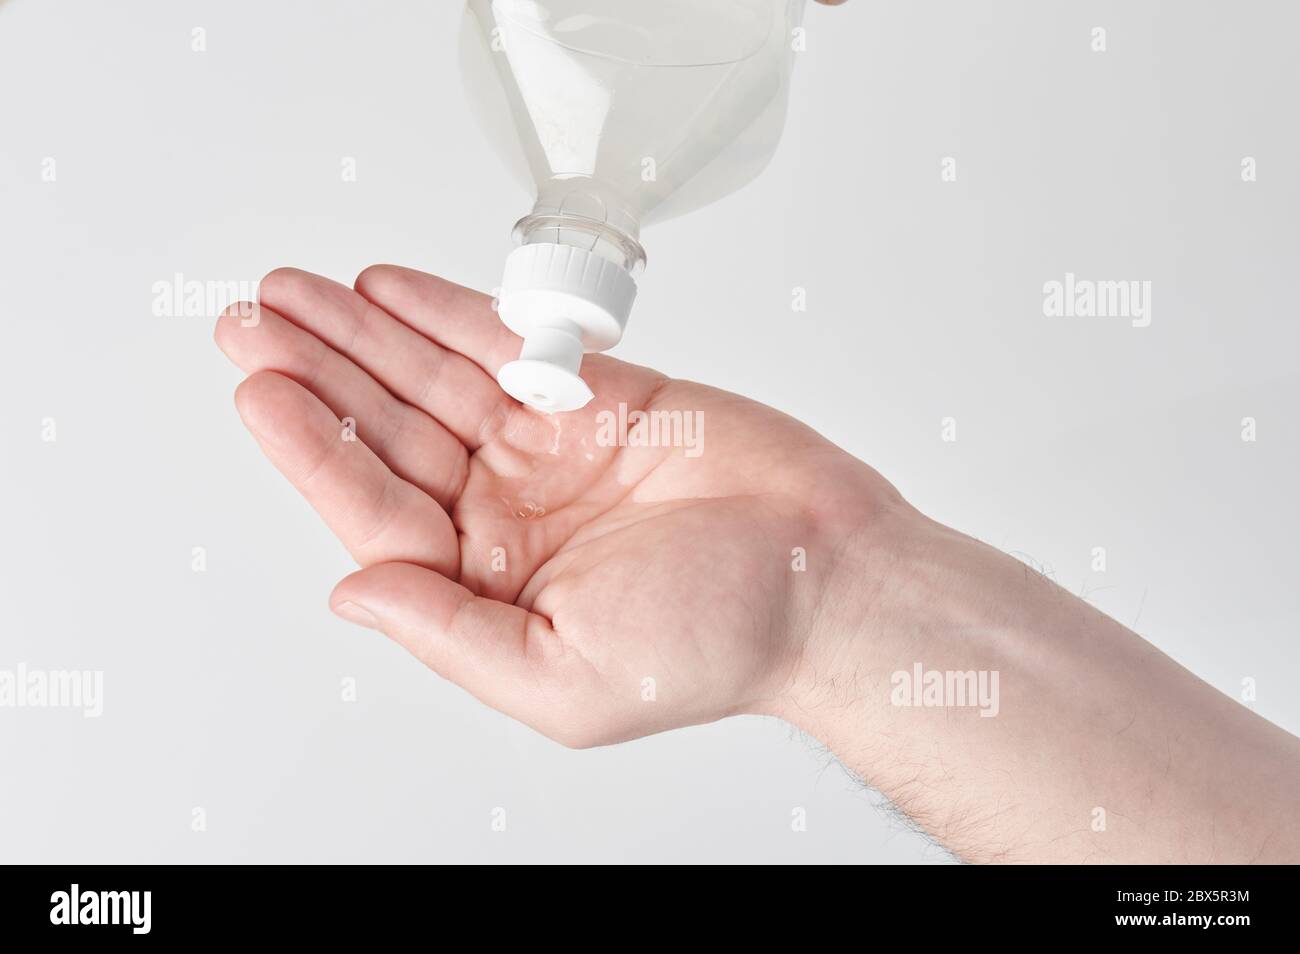 Pouring antibacterial gel on hand isolated in white background Stock Photo